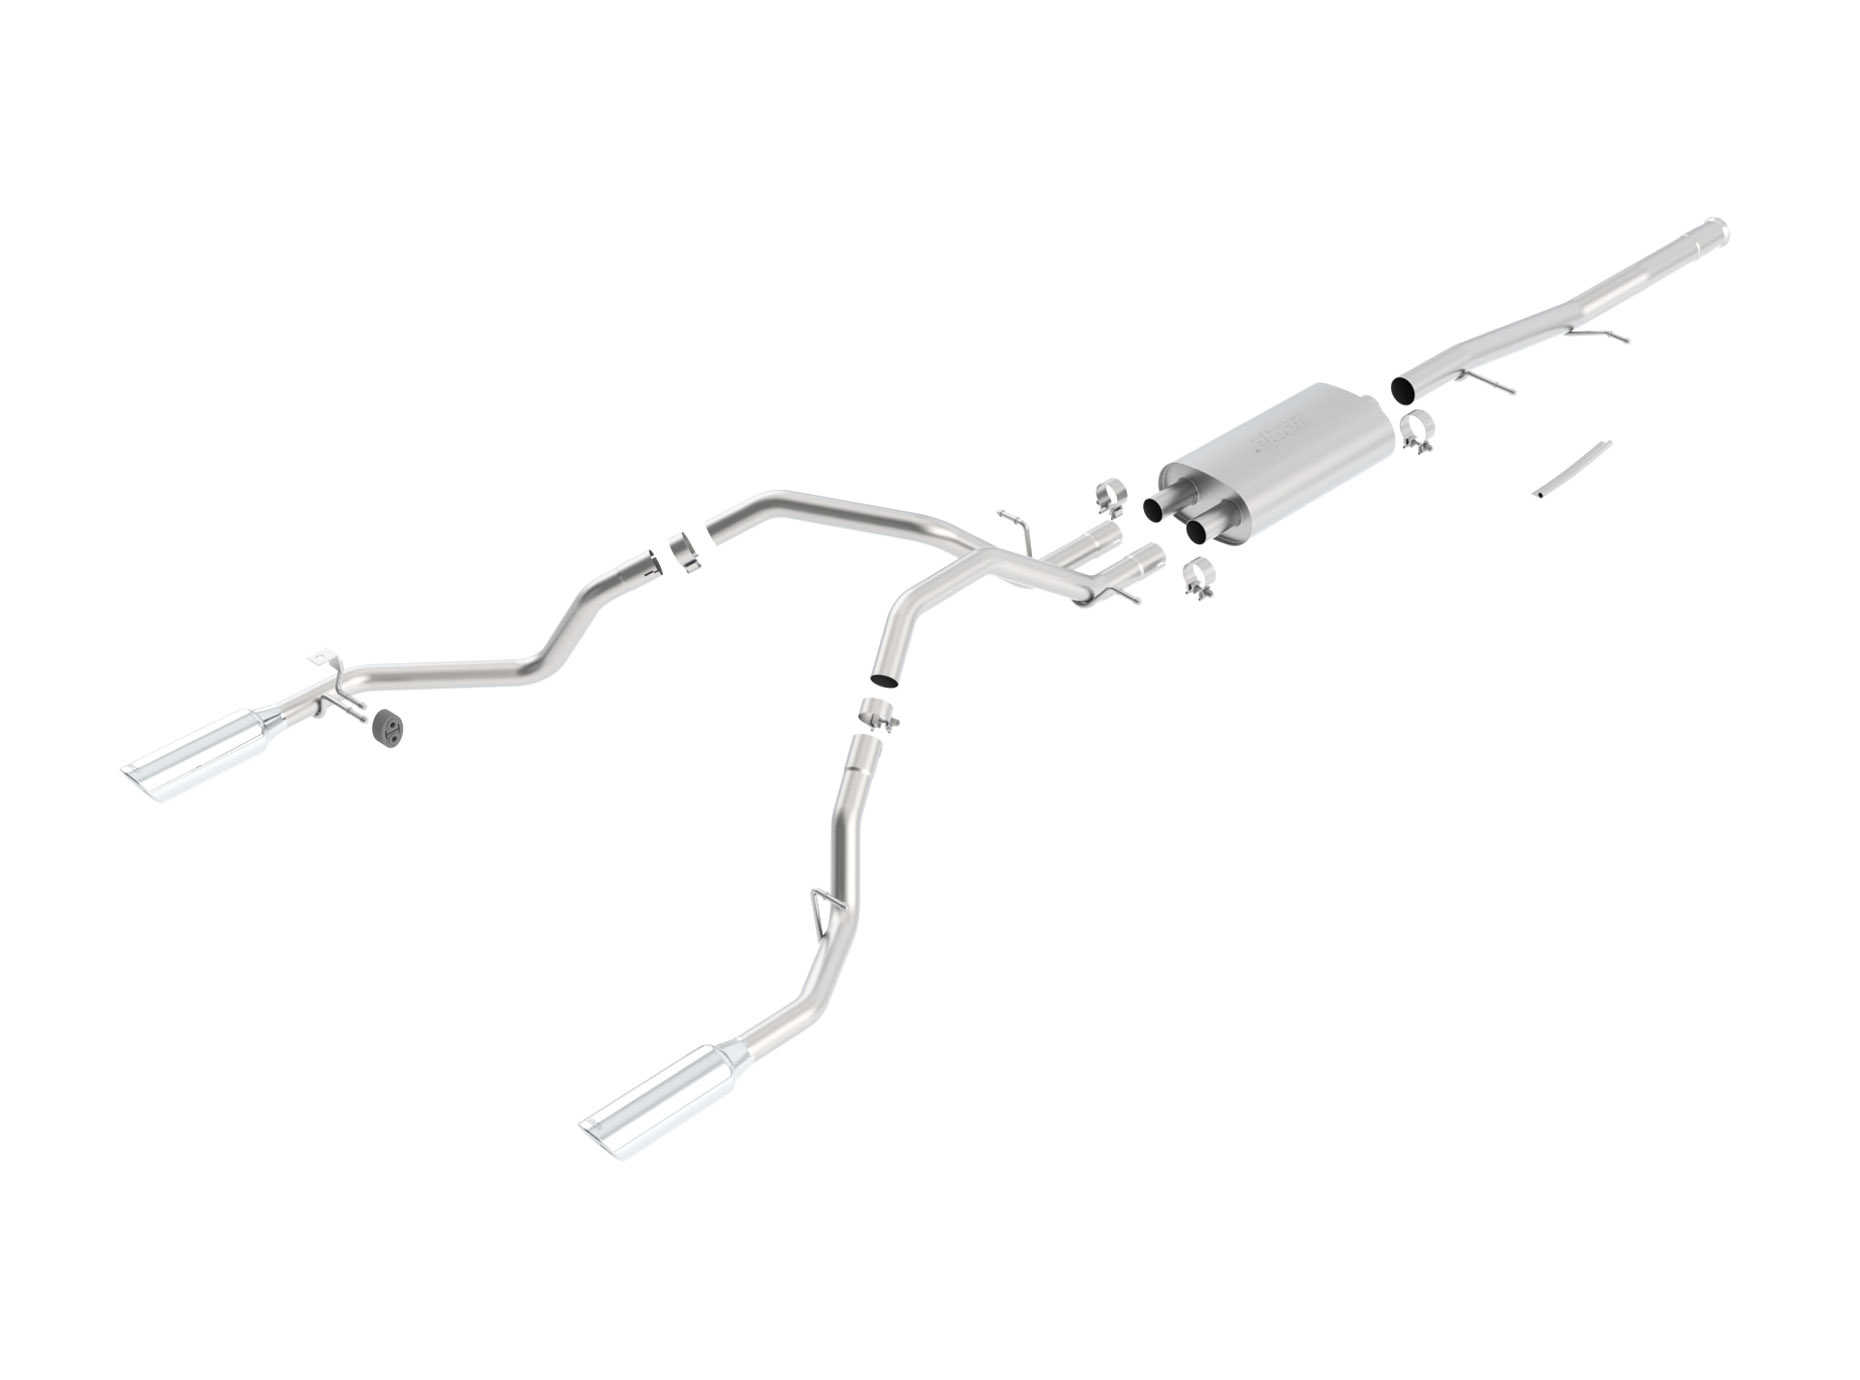 2009-2013 Chevy/GMC 1500 Borla Touring Catback Exhaust System w/Rear Exit Tips - Ext. Cab/Std. Box & Crew Cab/Short Bed